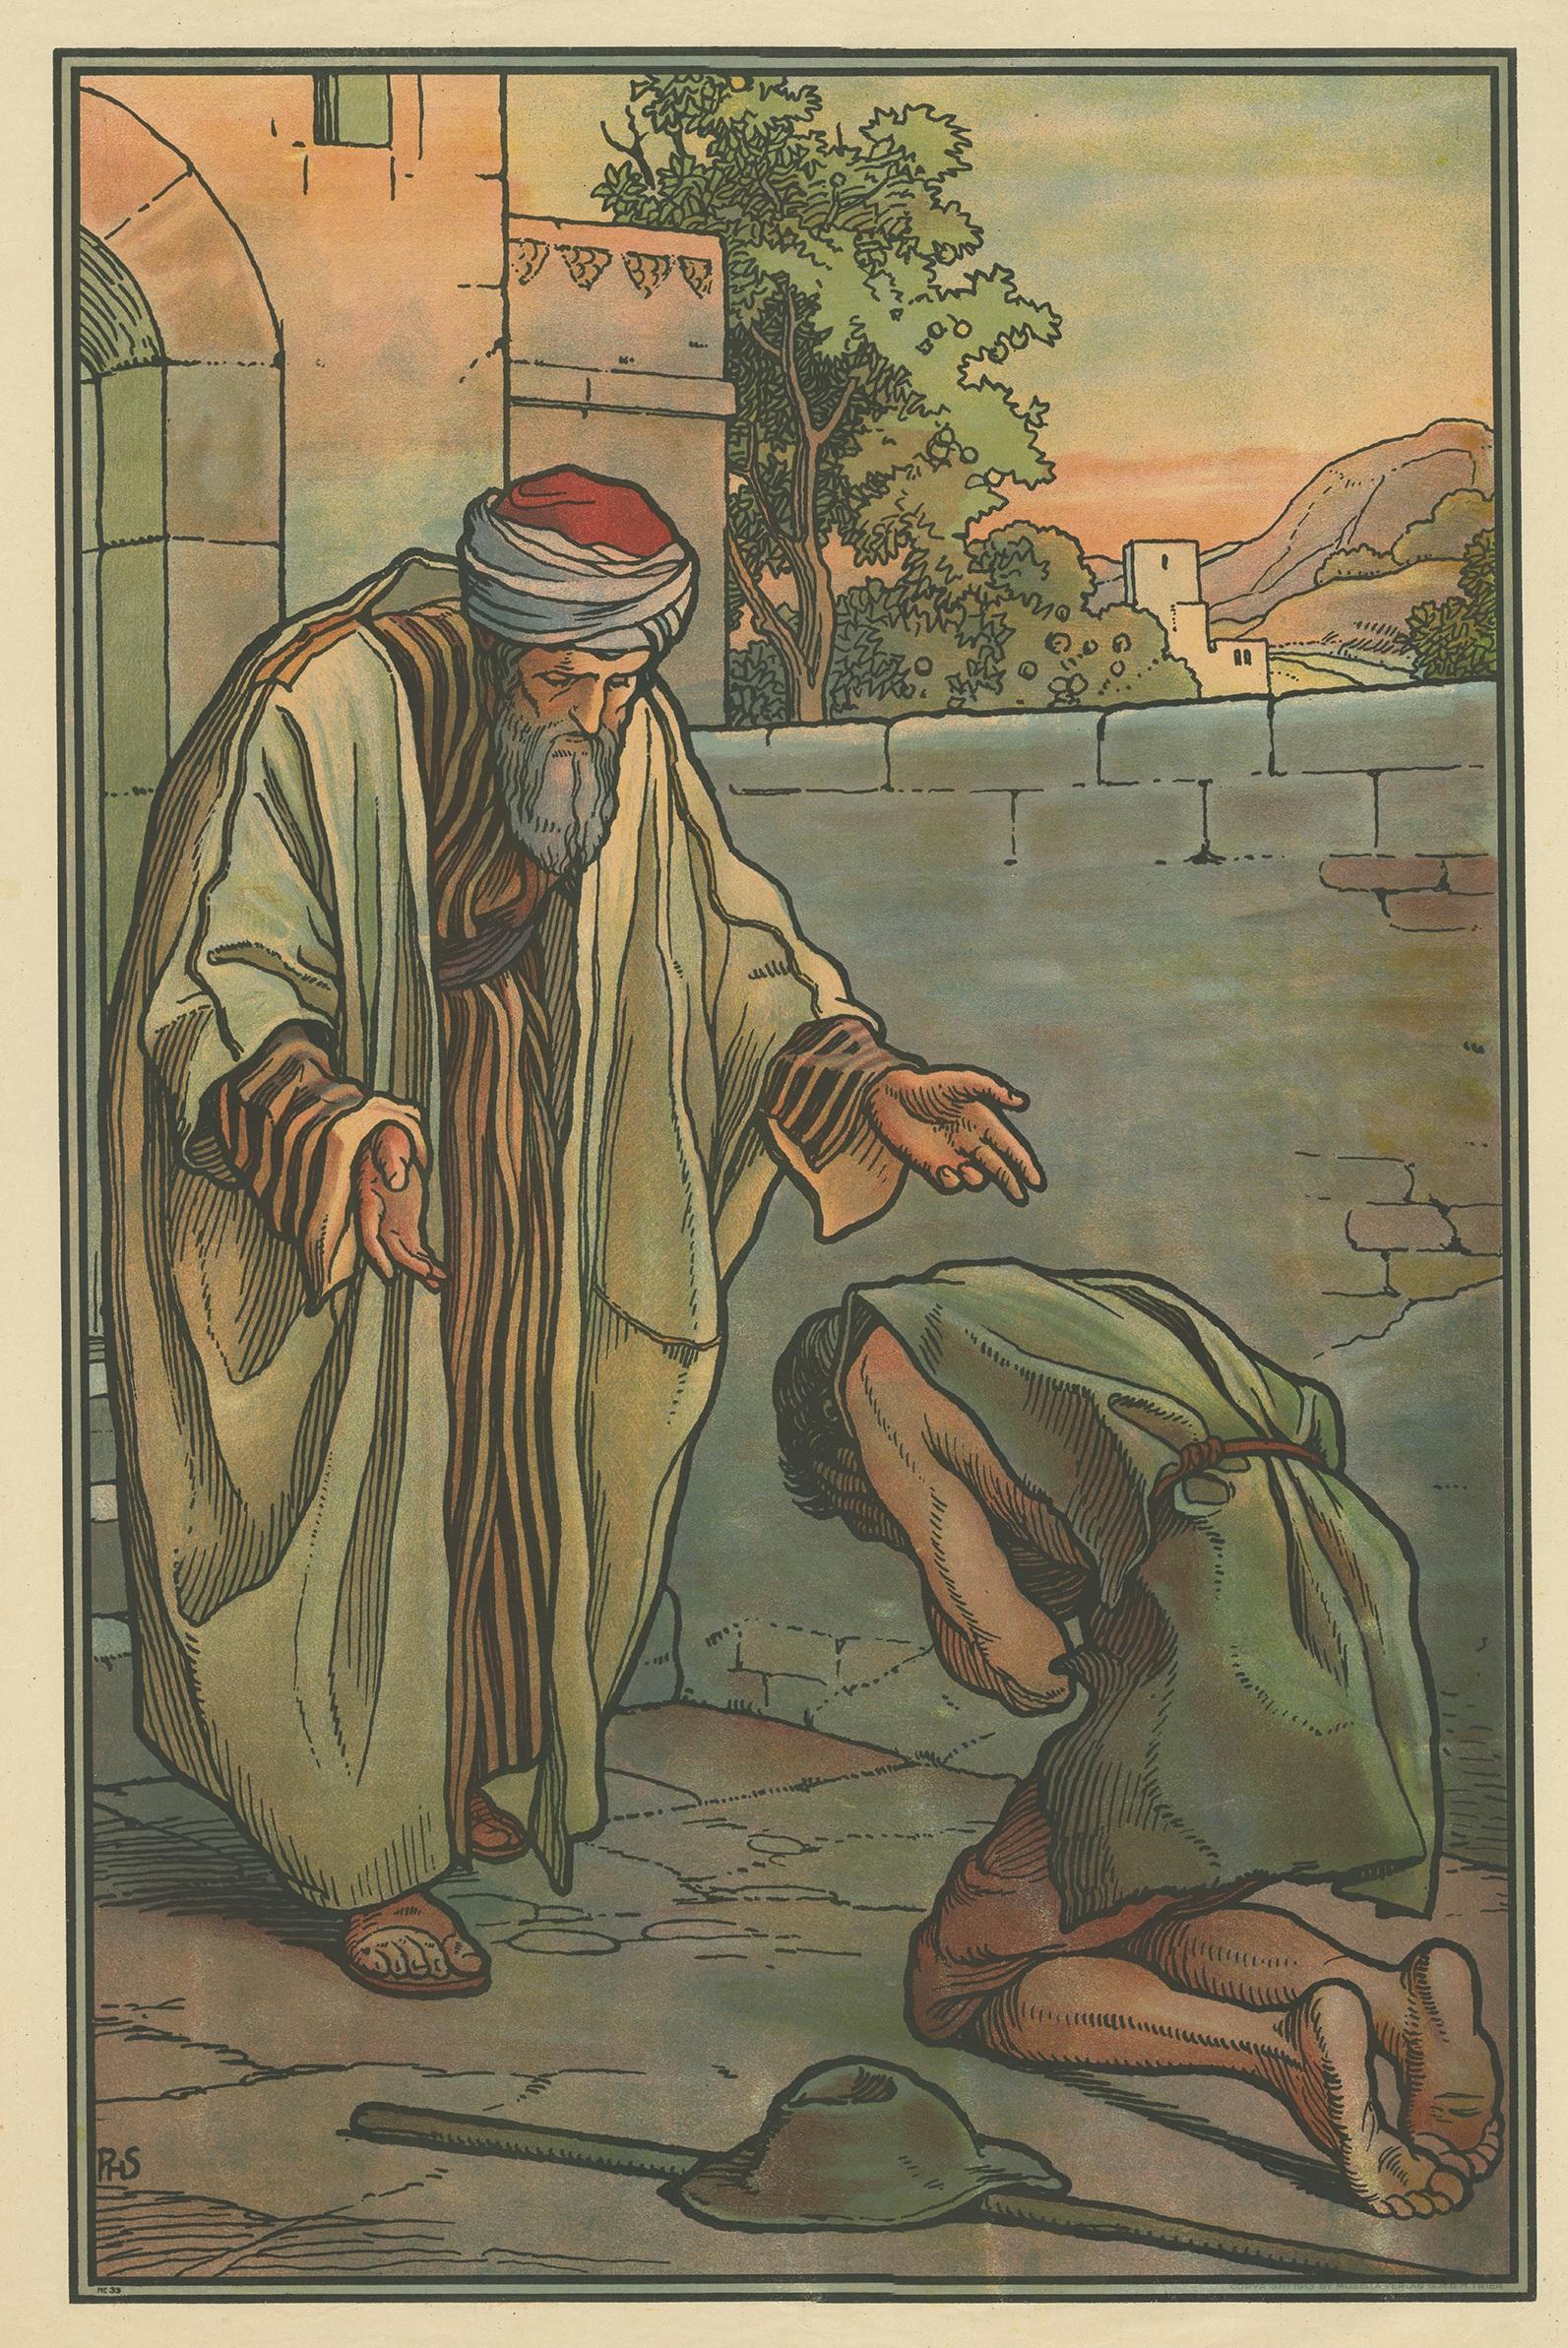 Large antique print of the Parable of the Prodigal Son. Published by Mosella-Verlag, 1913. This print originates from a series titled 'Kathol. Schulbibelwerk von Dr. Ecker'.